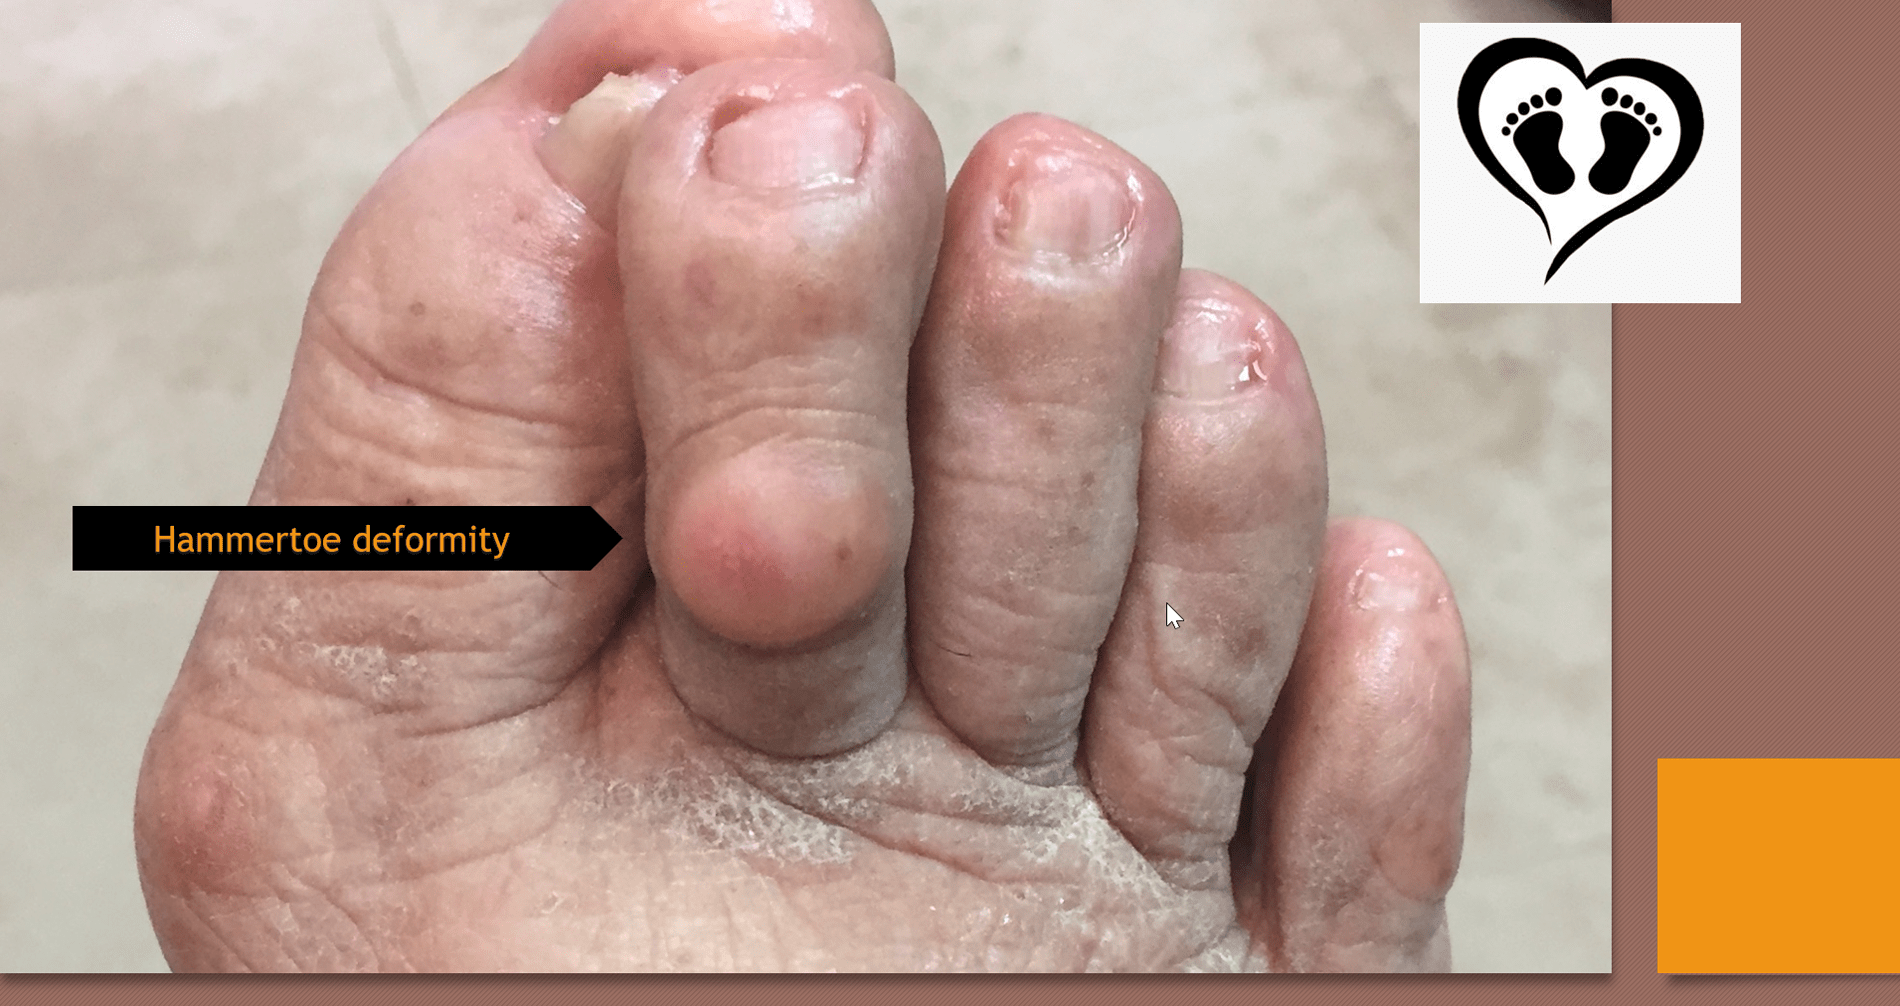 What You Can Do About Hammertoes